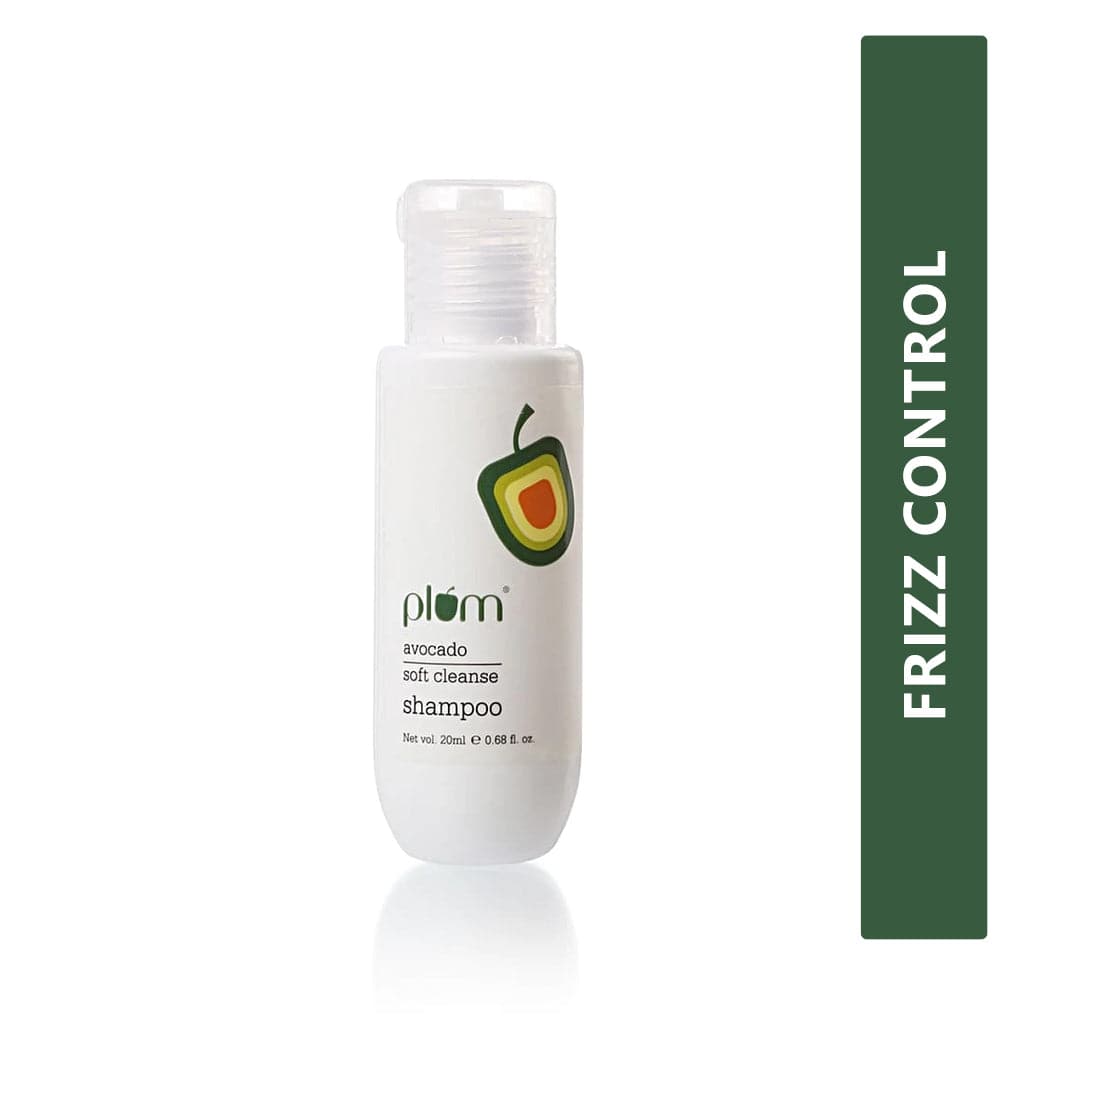 Avocado Soft Cleanse Shampoo | Travel- Friendly Mini | For Frizzy Hair | Sulphate Free